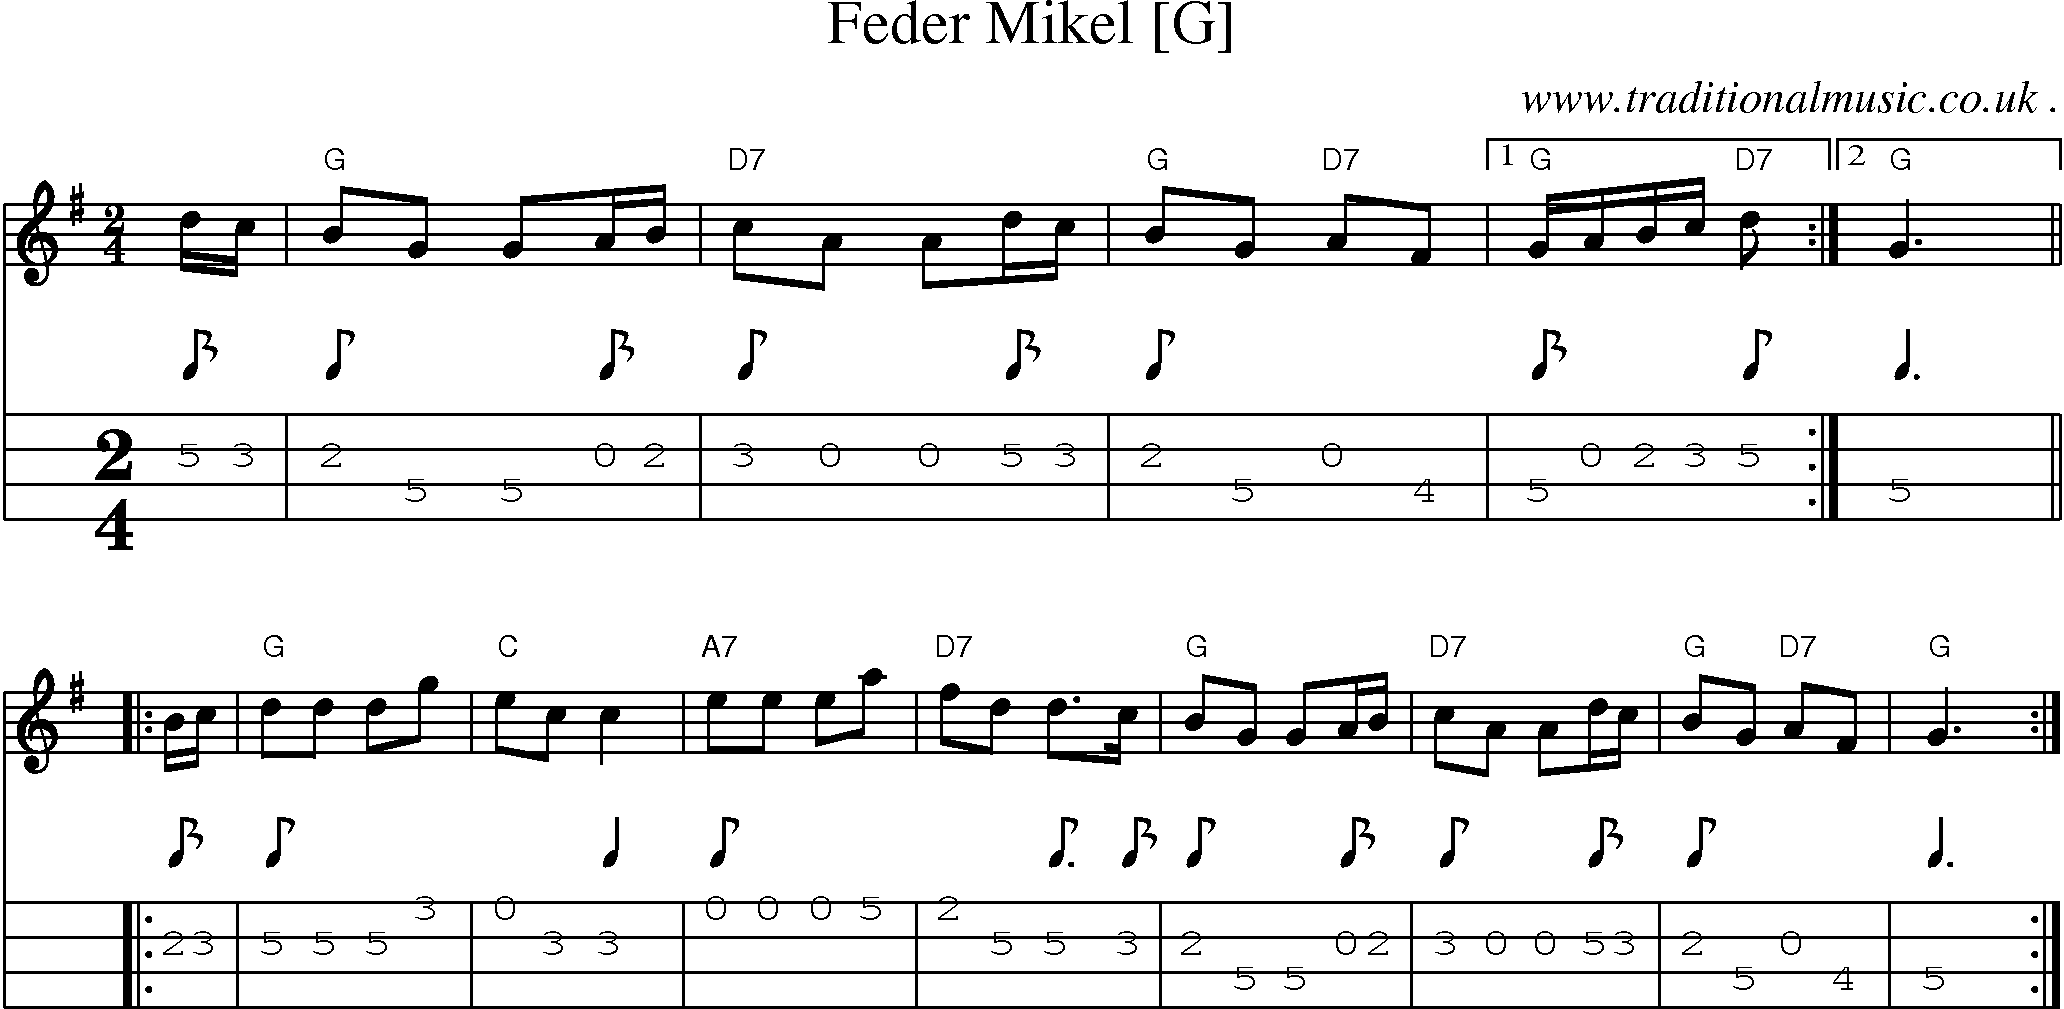 Sheet-music  score, Chords and Mandolin Tabs for Feder Mikel [g]